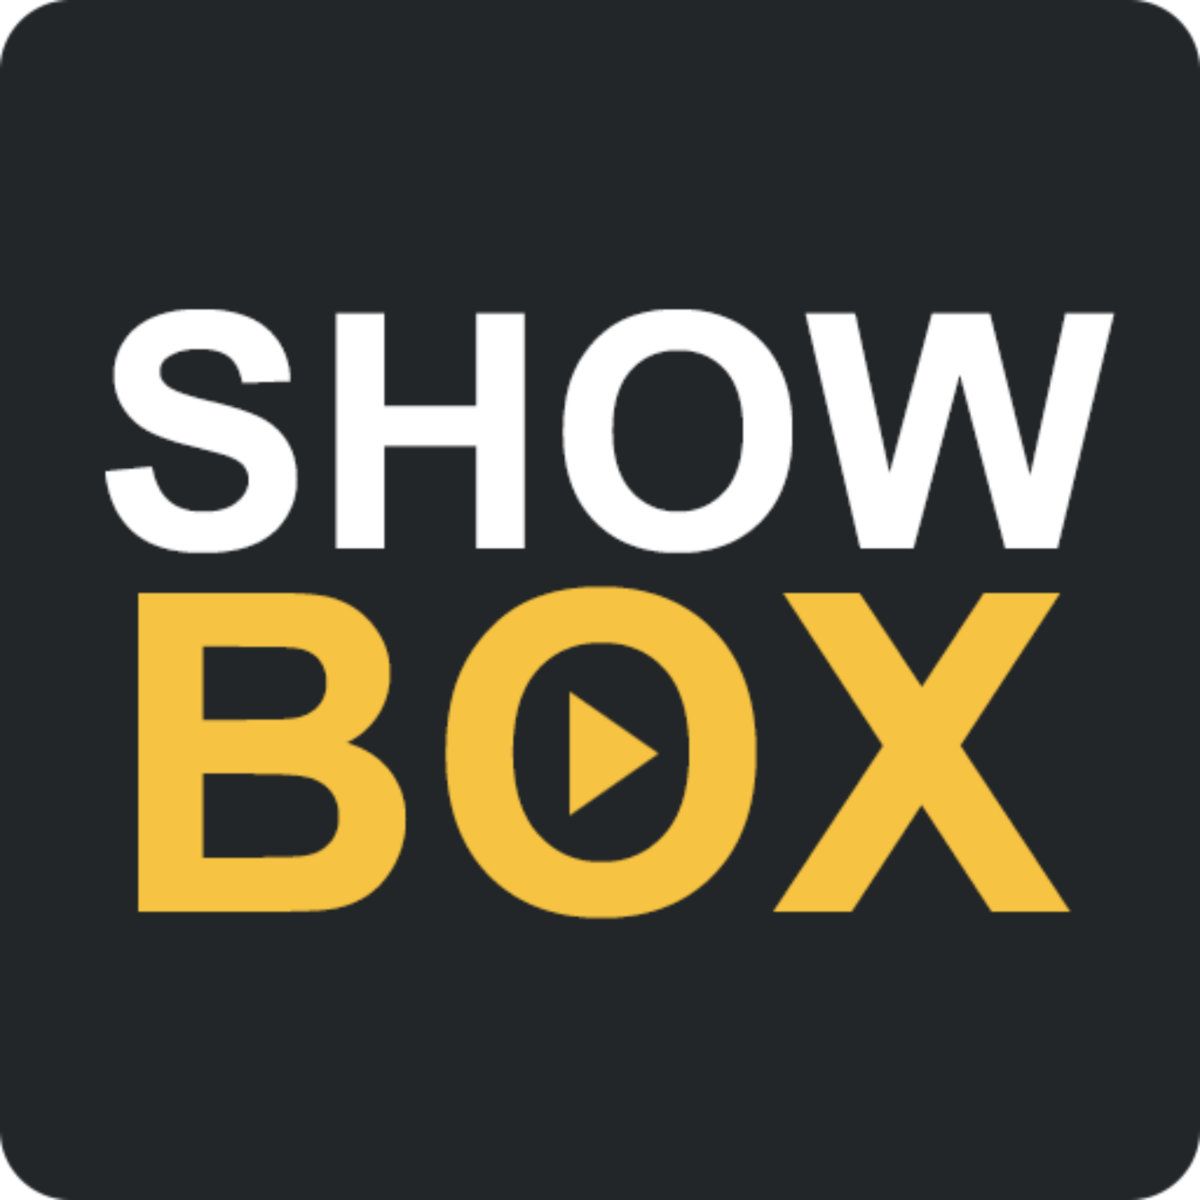 What happened to Showbox and what is the best alternative?